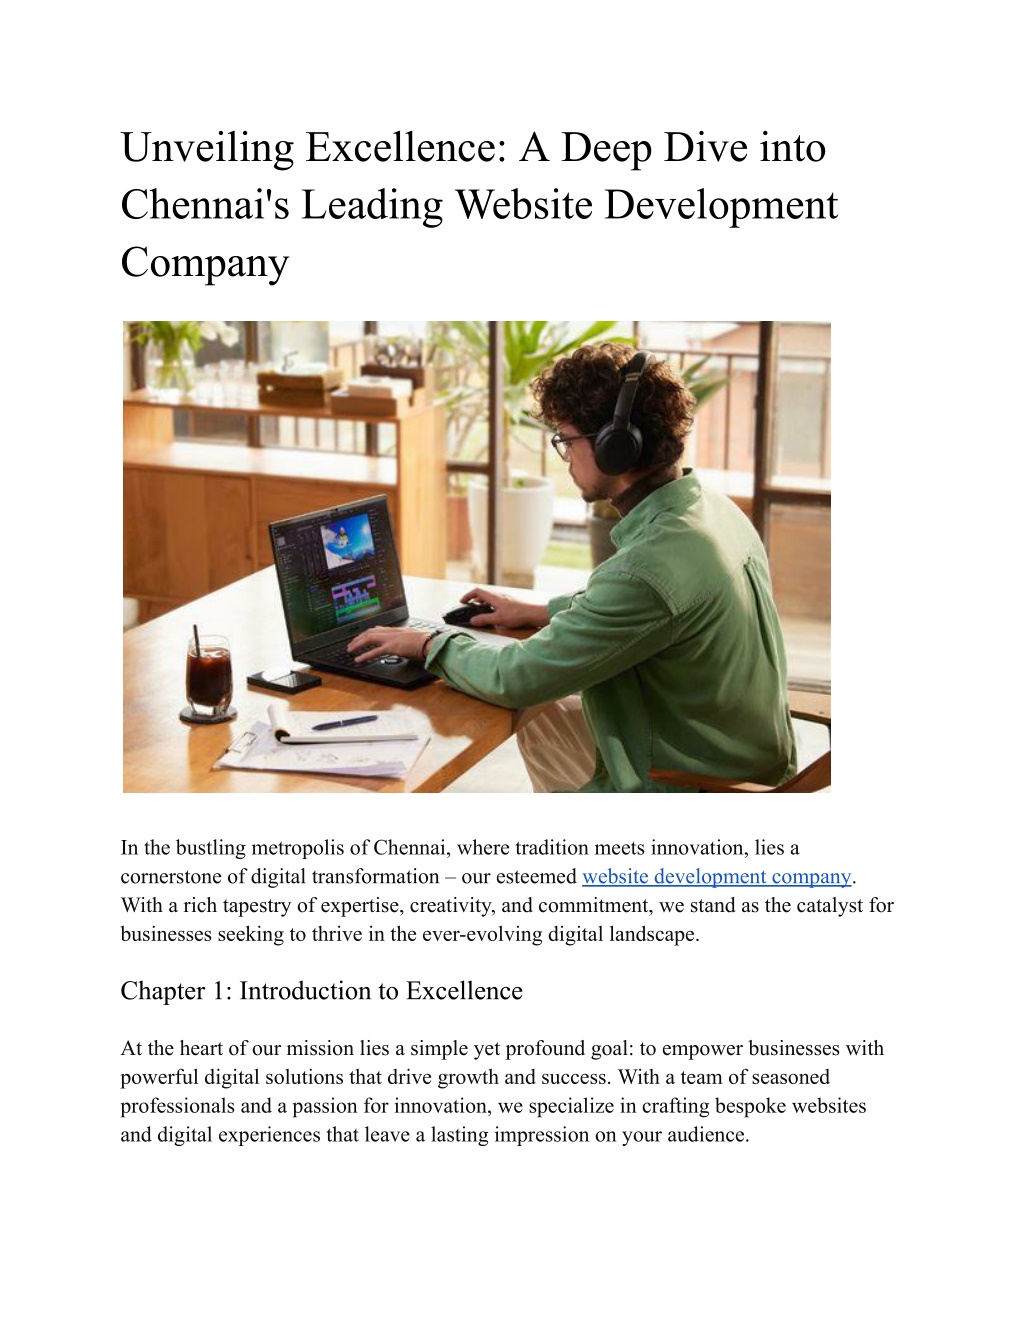 unveiling excellence a deep dive into chennai l.w